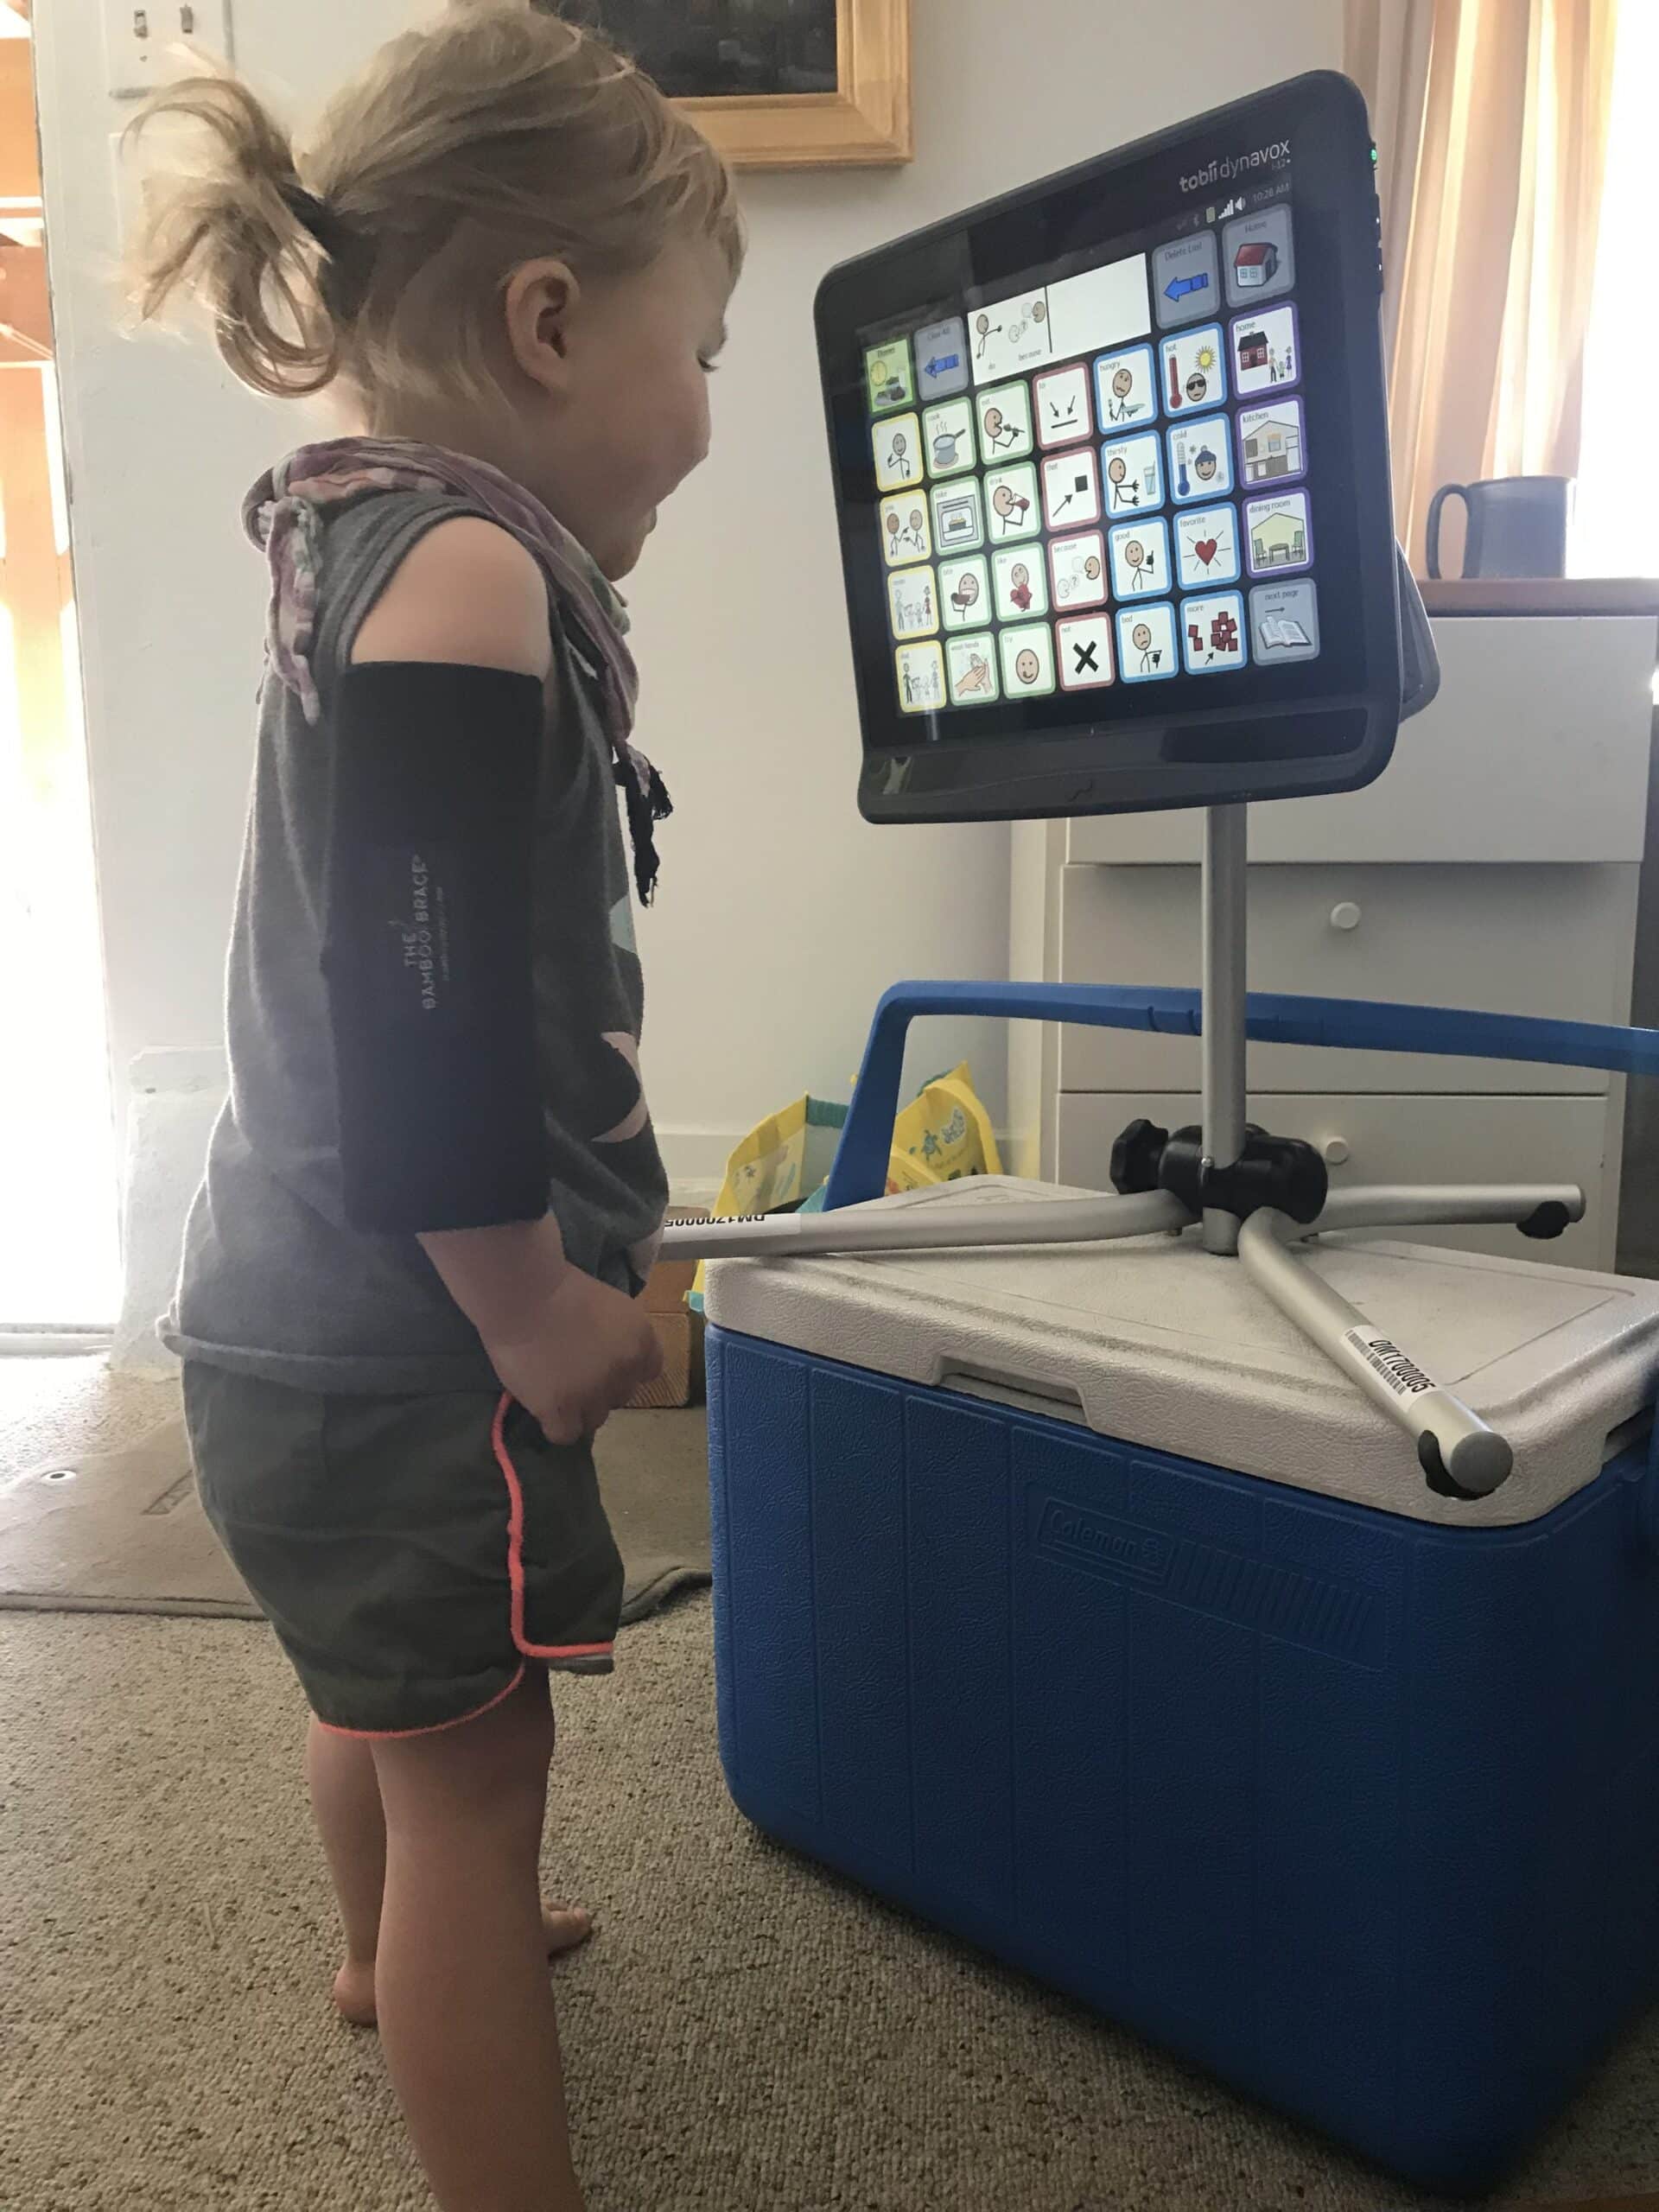 A little girl with neurological disorder looking at an eye-gaze speech generating device by TobiiDynavox, in which she uses her eyes to communicate.